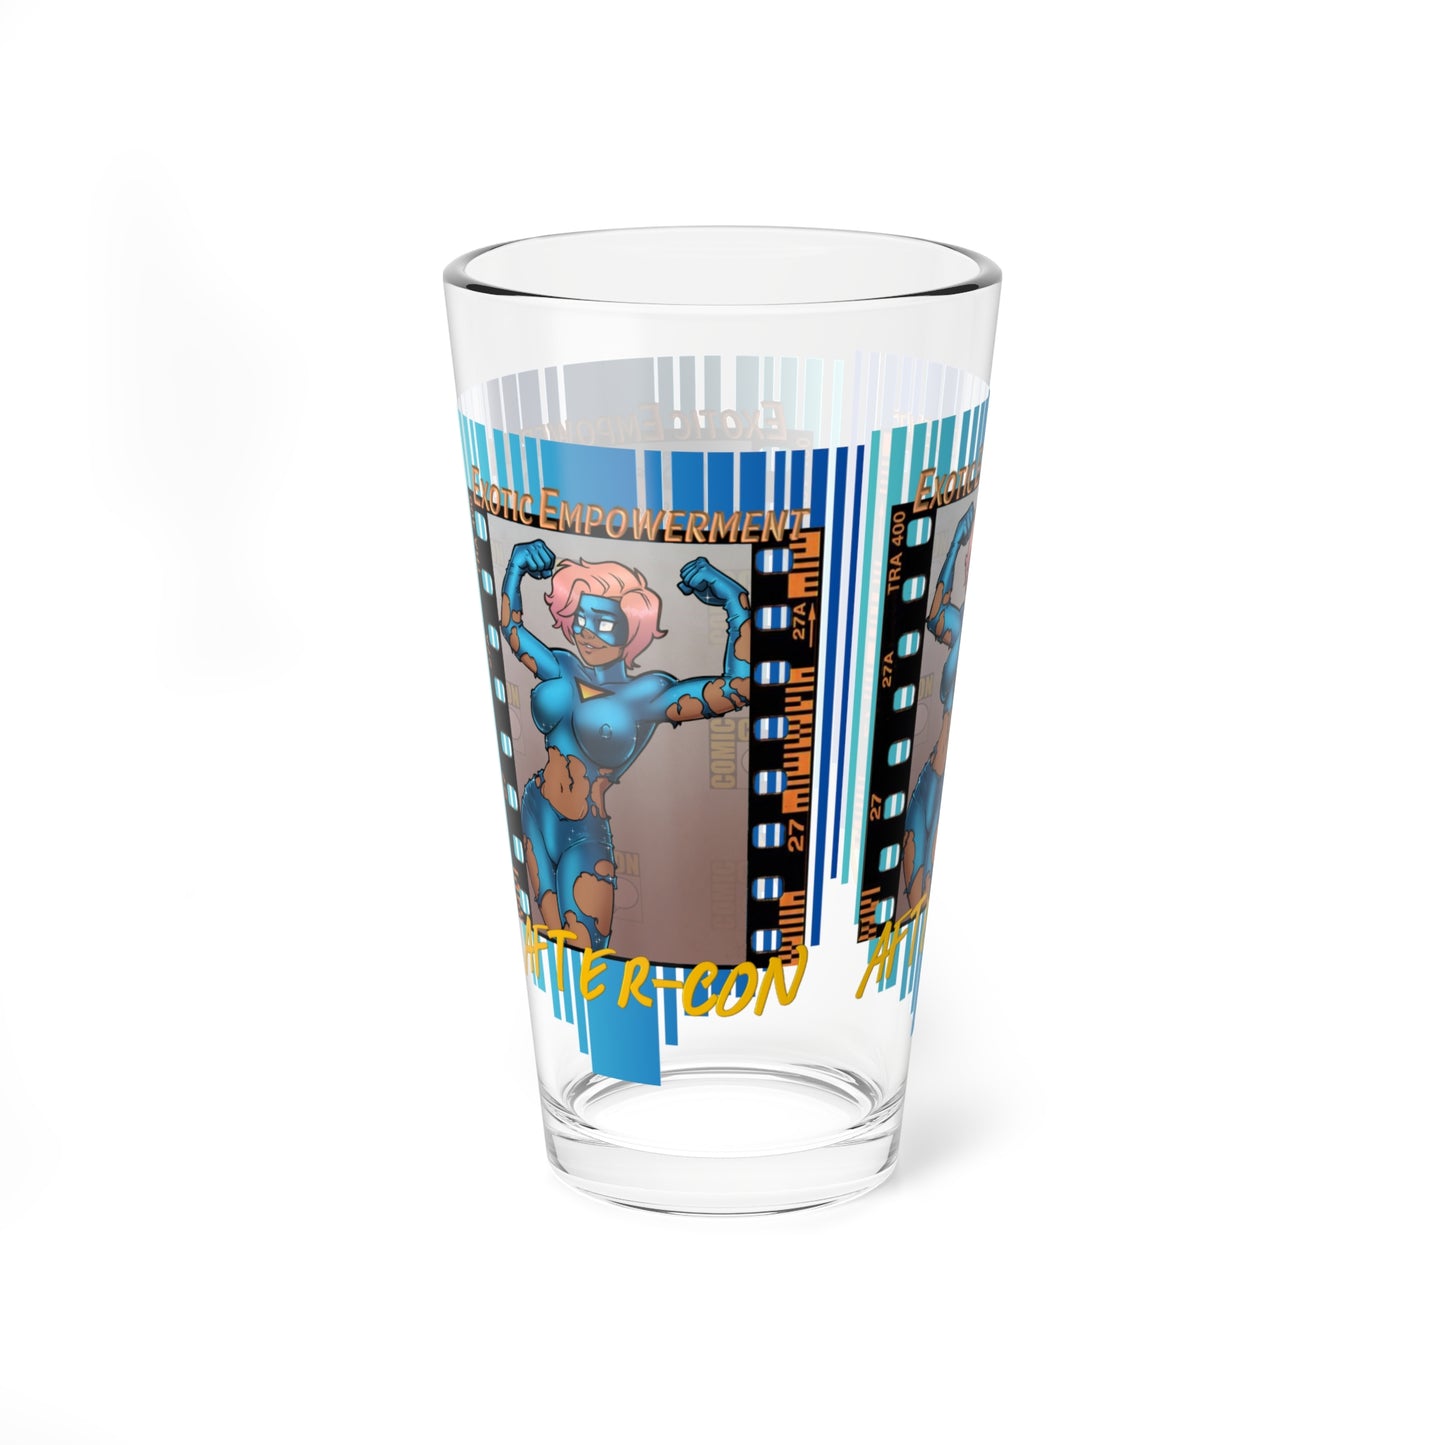 After-Con "Exotic Empowerment" Pint Glass, 16oz